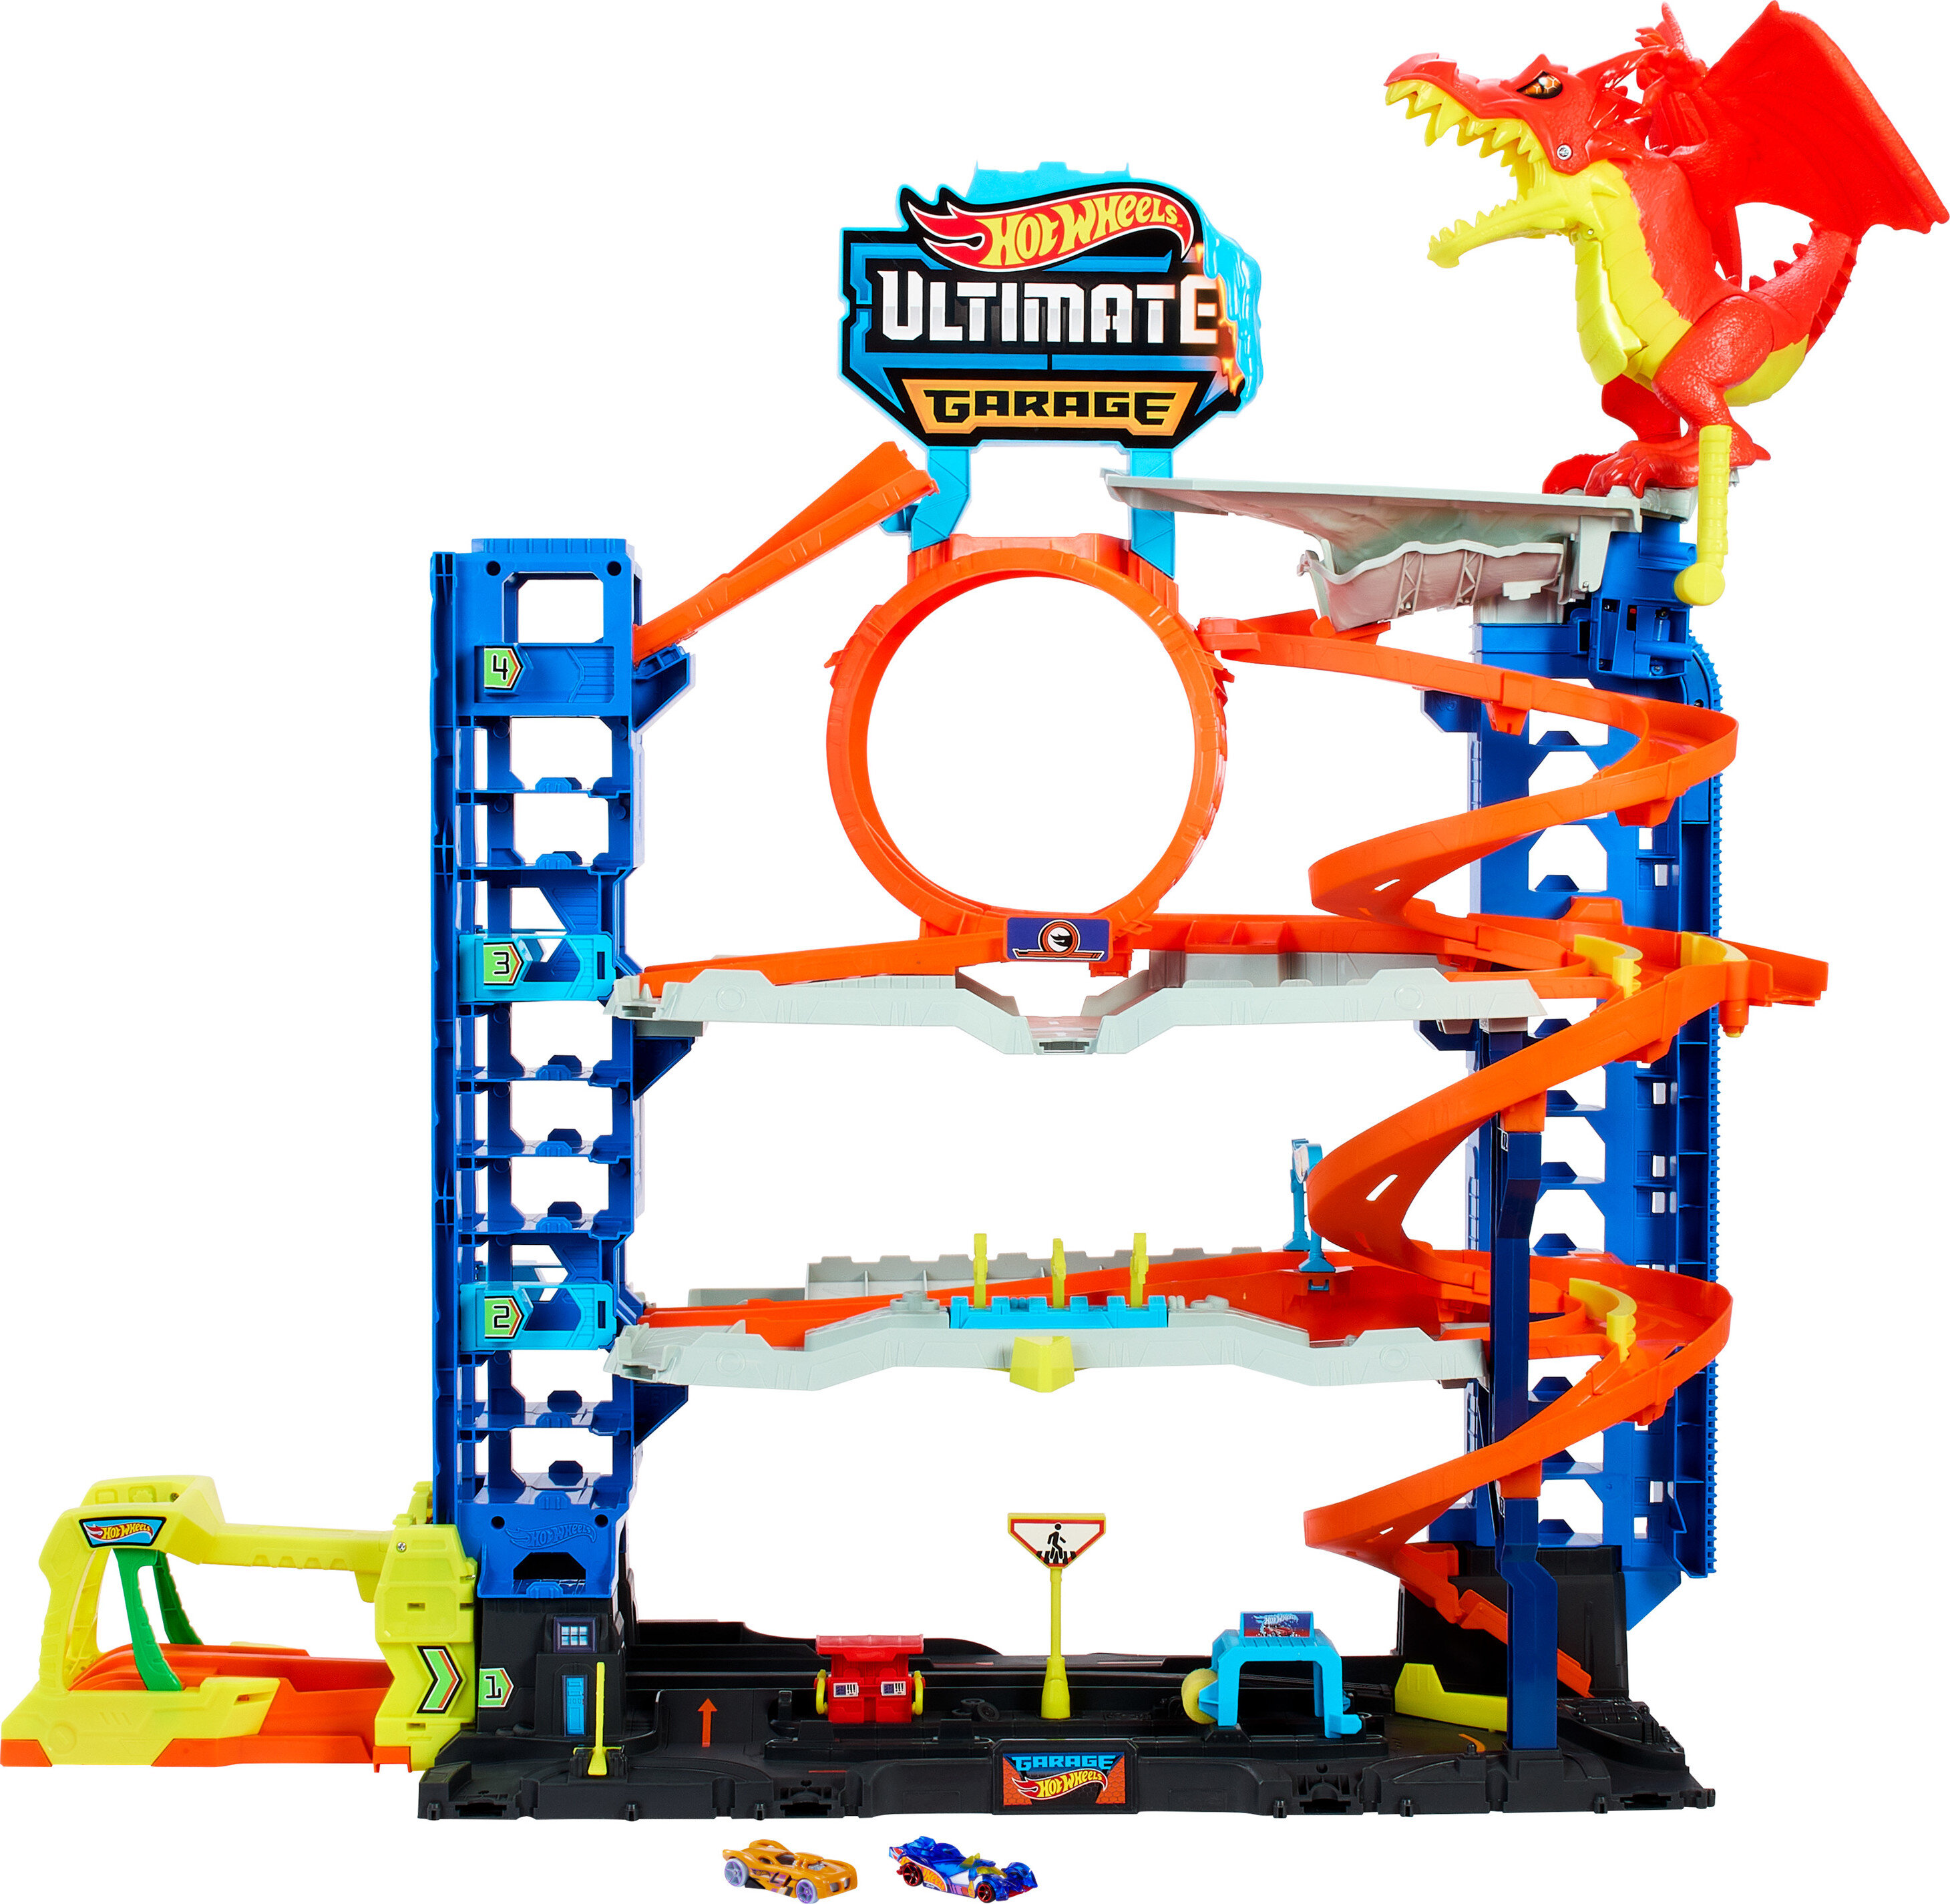 Hot Wheels City Ultimate Garage Playset with 2 Die-Cast Cars, Toy Storage for 50+ Cars for Kids Age 4-8 - image 1 of 7